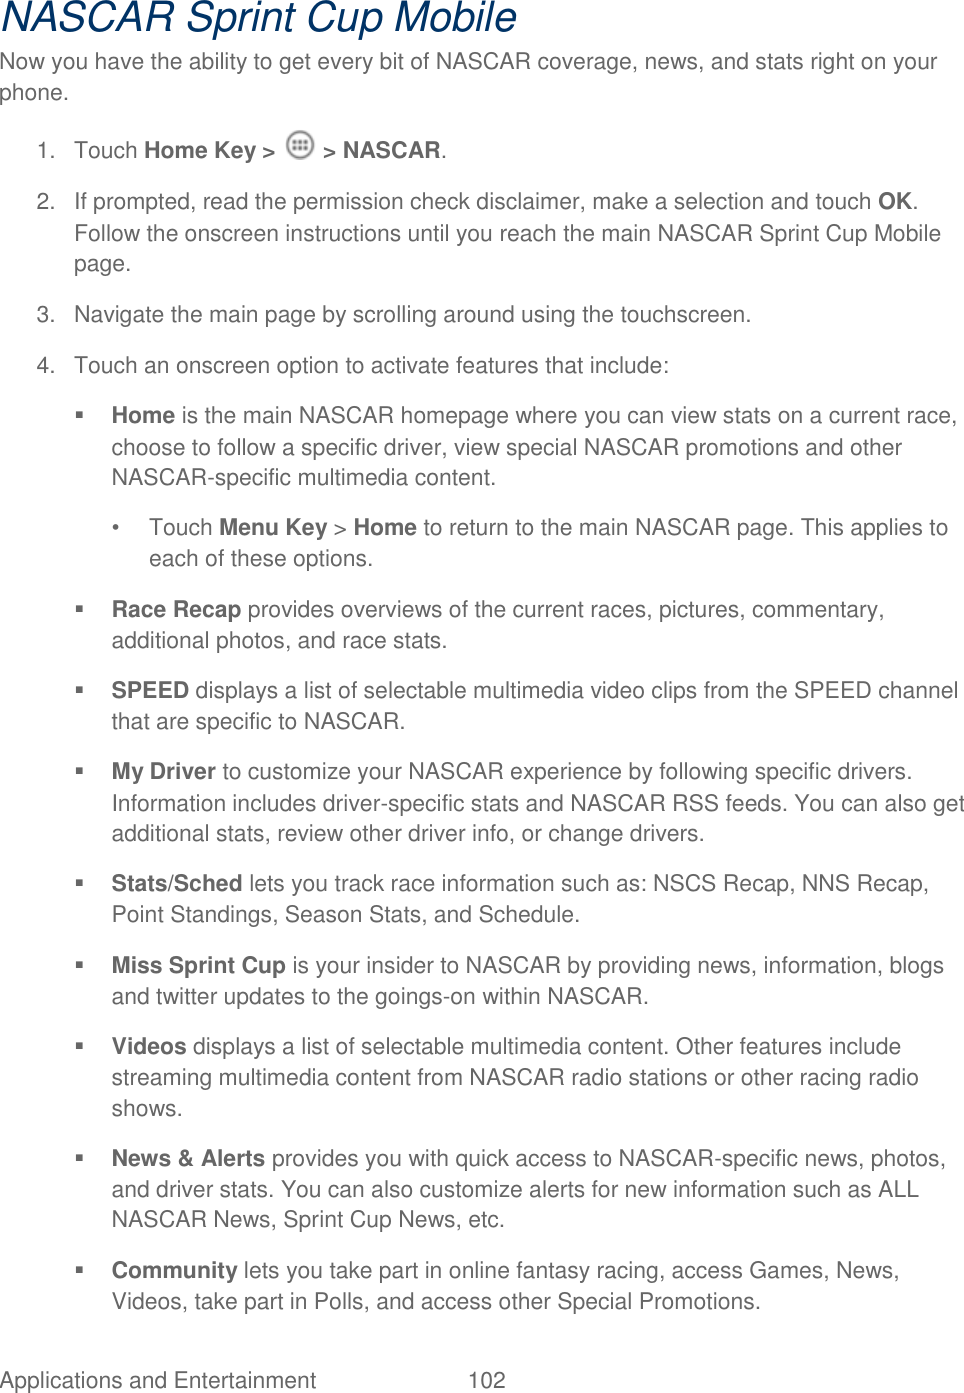 Applications and Entertainment  102   NASCAR Sprint Cup Mobile Now you have the ability to get every bit of NASCAR coverage, news, and stats right on your phone. 1.  Touch Home Key &gt;   &gt; NASCAR. 2.  If prompted, read the permission check disclaimer, make a selection and touch OK. Follow the onscreen instructions until you reach the main NASCAR Sprint Cup Mobile page. 3.  Navigate the main page by scrolling around using the touchscreen.  4.  Touch an onscreen option to activate features that include:   Home is the main NASCAR homepage where you can view stats on a current race, choose to follow a specific driver, view special NASCAR promotions and other NASCAR-specific multimedia content. •  Touch Menu Key &gt; Home to return to the main NASCAR page. This applies to each of these options.  Race Recap provides overviews of the current races, pictures, commentary, additional photos, and race stats.  SPEED displays a list of selectable multimedia video clips from the SPEED channel that are specific to NASCAR.  My Driver to customize your NASCAR experience by following specific drivers. Information includes driver-specific stats and NASCAR RSS feeds. You can also get additional stats, review other driver info, or change drivers.  Stats/Sched lets you track race information such as: NSCS Recap, NNS Recap, Point Standings, Season Stats, and Schedule.  Miss Sprint Cup is your insider to NASCAR by providing news, information, blogs and twitter updates to the goings-on within NASCAR.  Videos displays a list of selectable multimedia content. Other features include streaming multimedia content from NASCAR radio stations or other racing radio shows.  News &amp; Alerts provides you with quick access to NASCAR-specific news, photos, and driver stats. You can also customize alerts for new information such as ALL NASCAR News, Sprint Cup News, etc.  Community lets you take part in online fantasy racing, access Games, News, Videos, take part in Polls, and access other Special Promotions. 